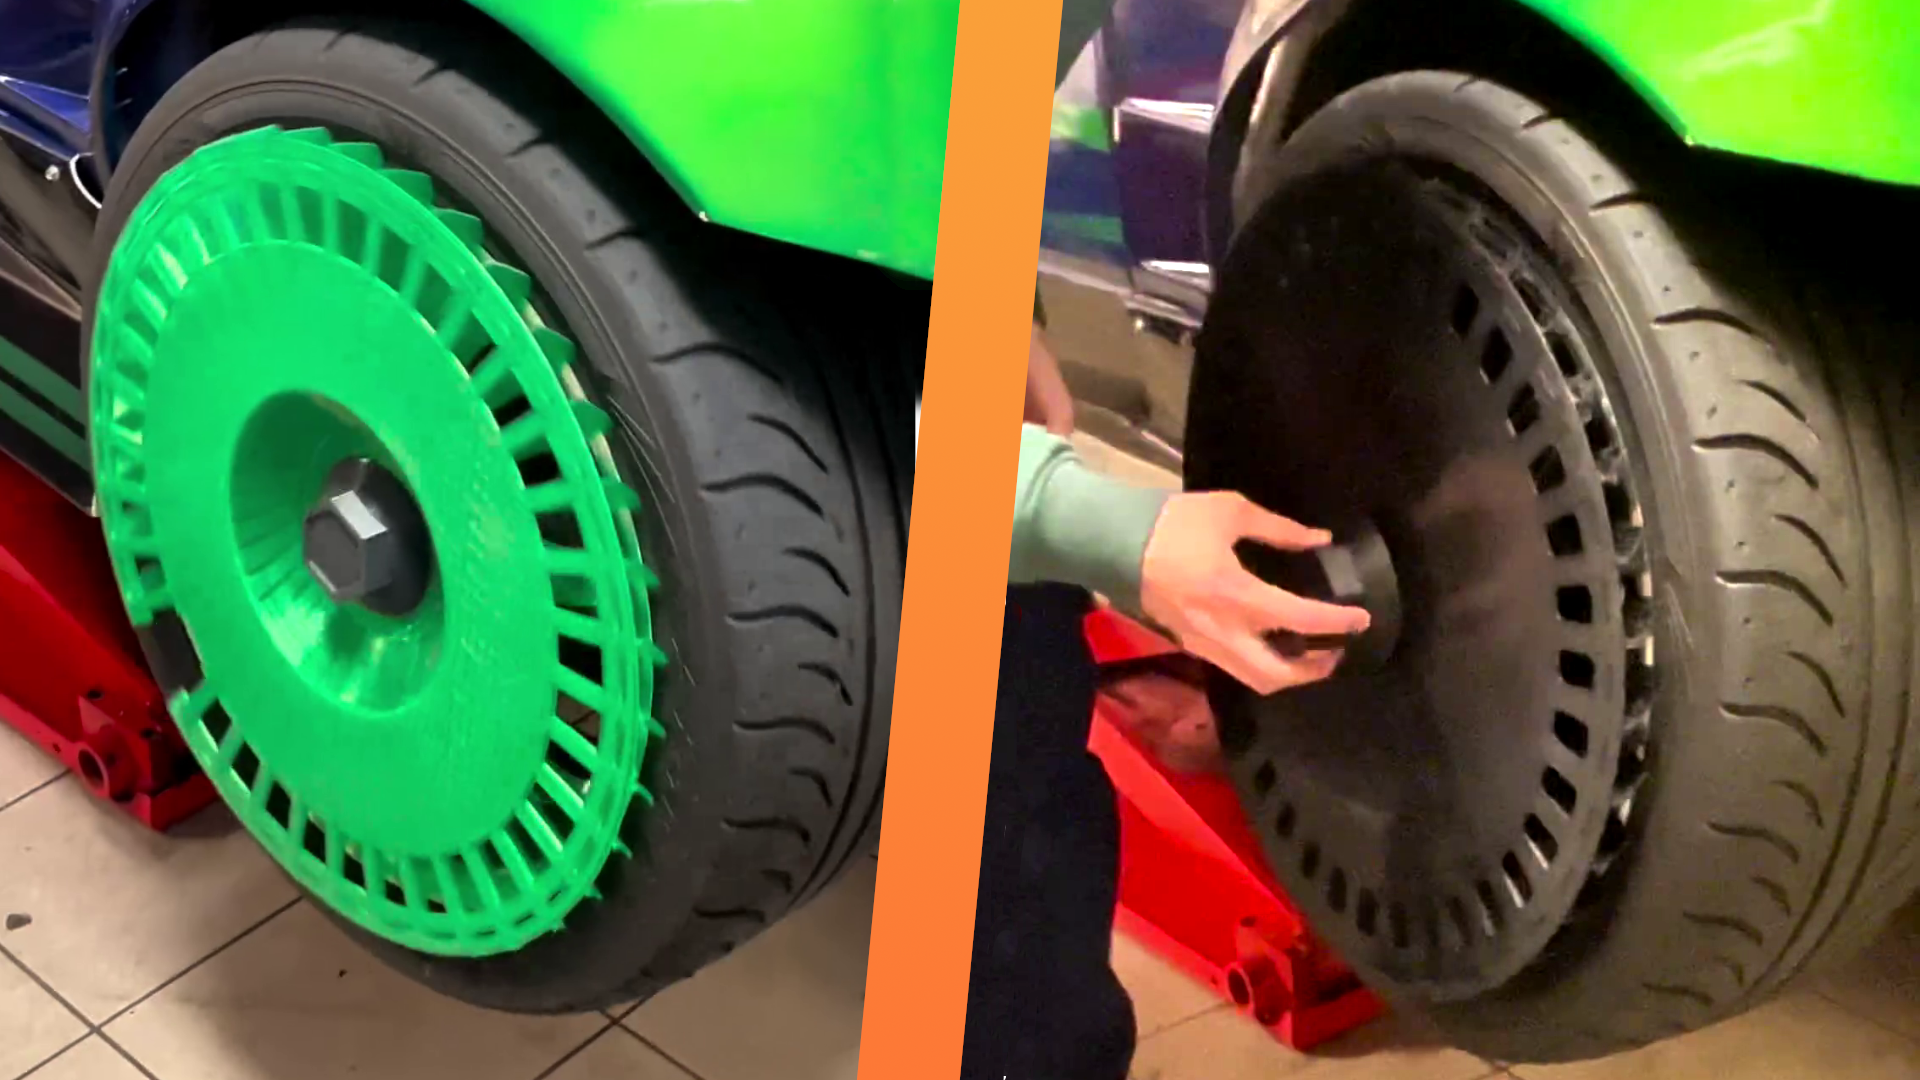 3D-Printed Turbofans Could Be the Hottest New Wheel Trend